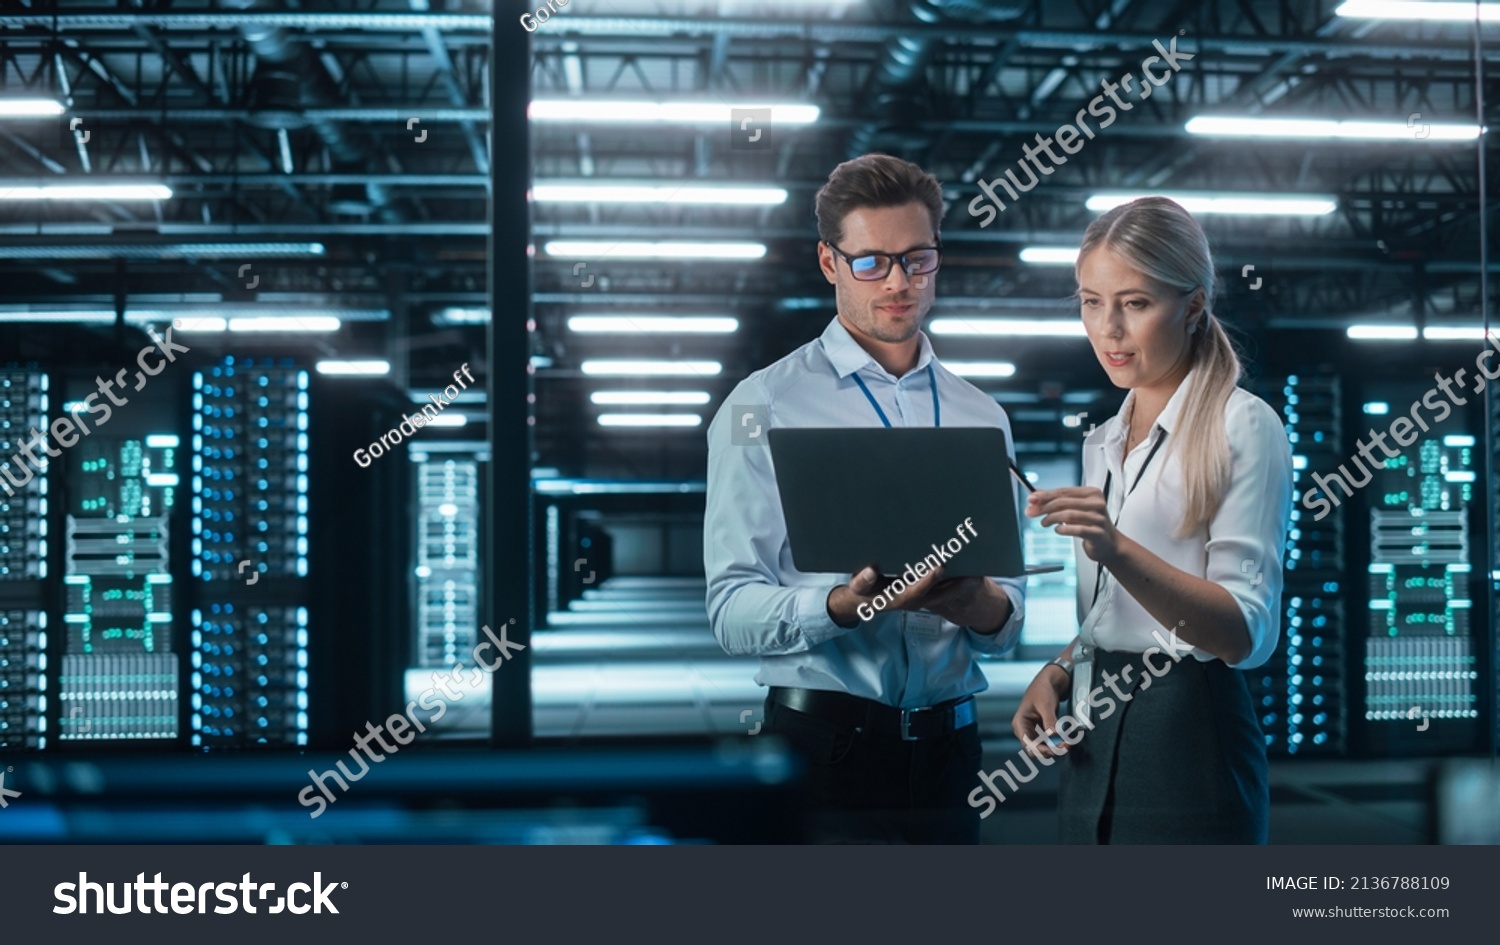 Male and Female Programmers Talking about Work, Solving Problems Together, Using Laptop Computer. Software Development  Code Writing  Website Design  Database Architecture Concept #2136788109